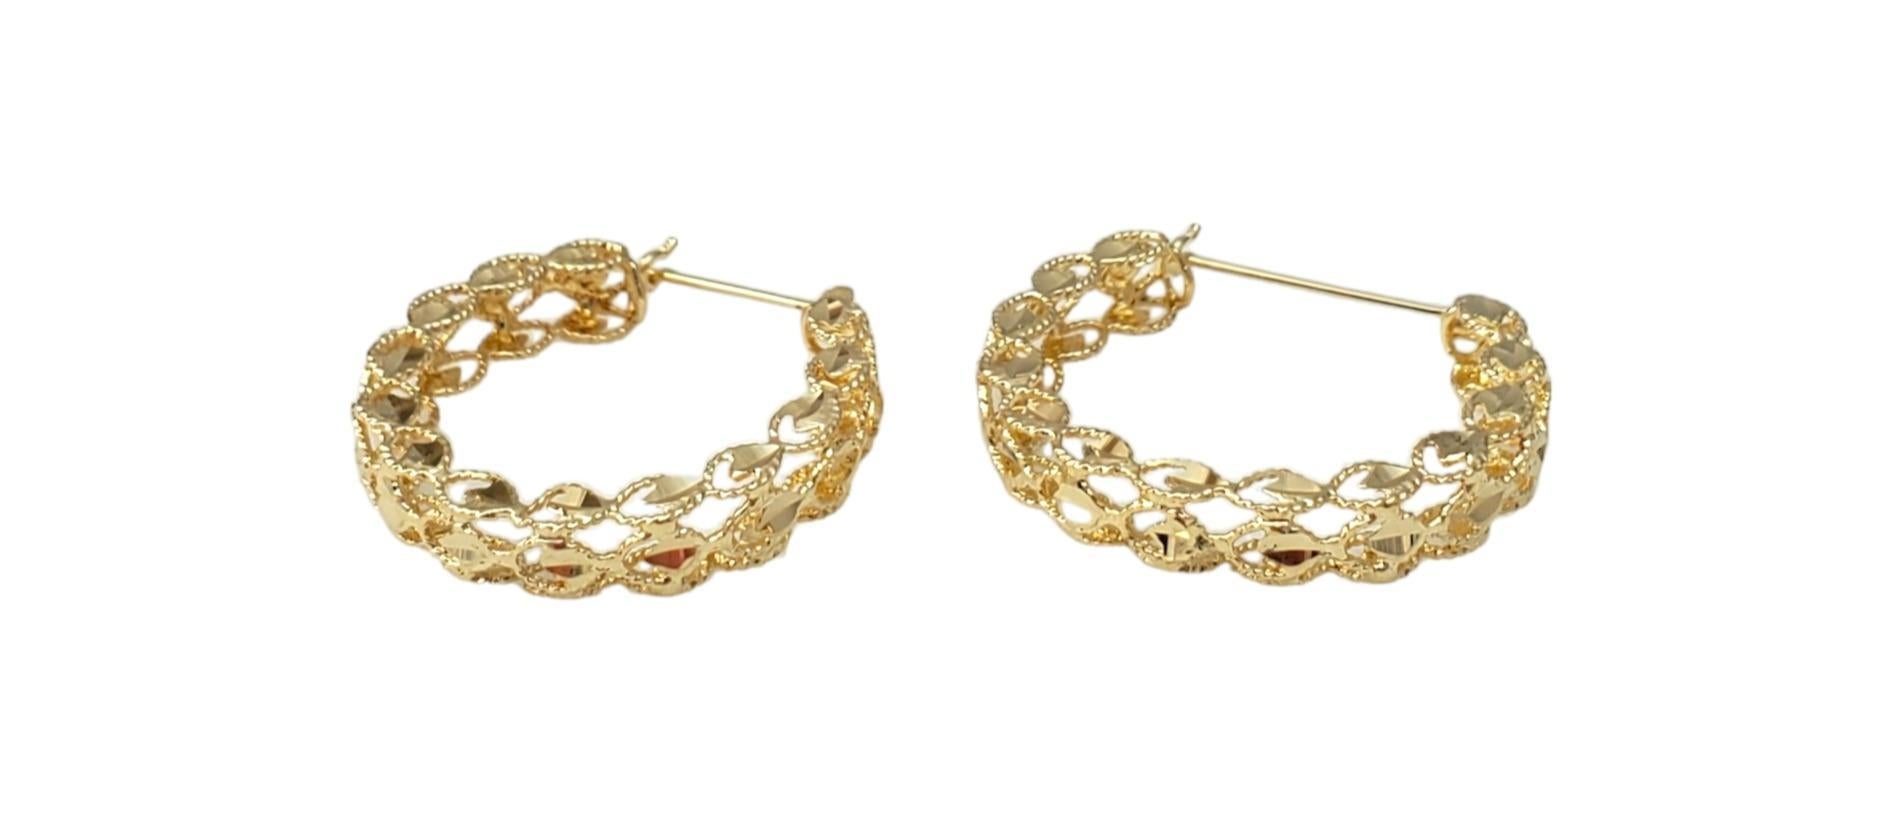 Vintage 14K Yellow Gold Faceted Hoops - 

These timeless hoop earrings are a stunning accessory. 

Size:  24mm X 26mm

Weight:  3.3 dwt. /  5.1 gr.

Very good condition, professionally polished.

Stamped 14K

Will come packaged in a gift box or